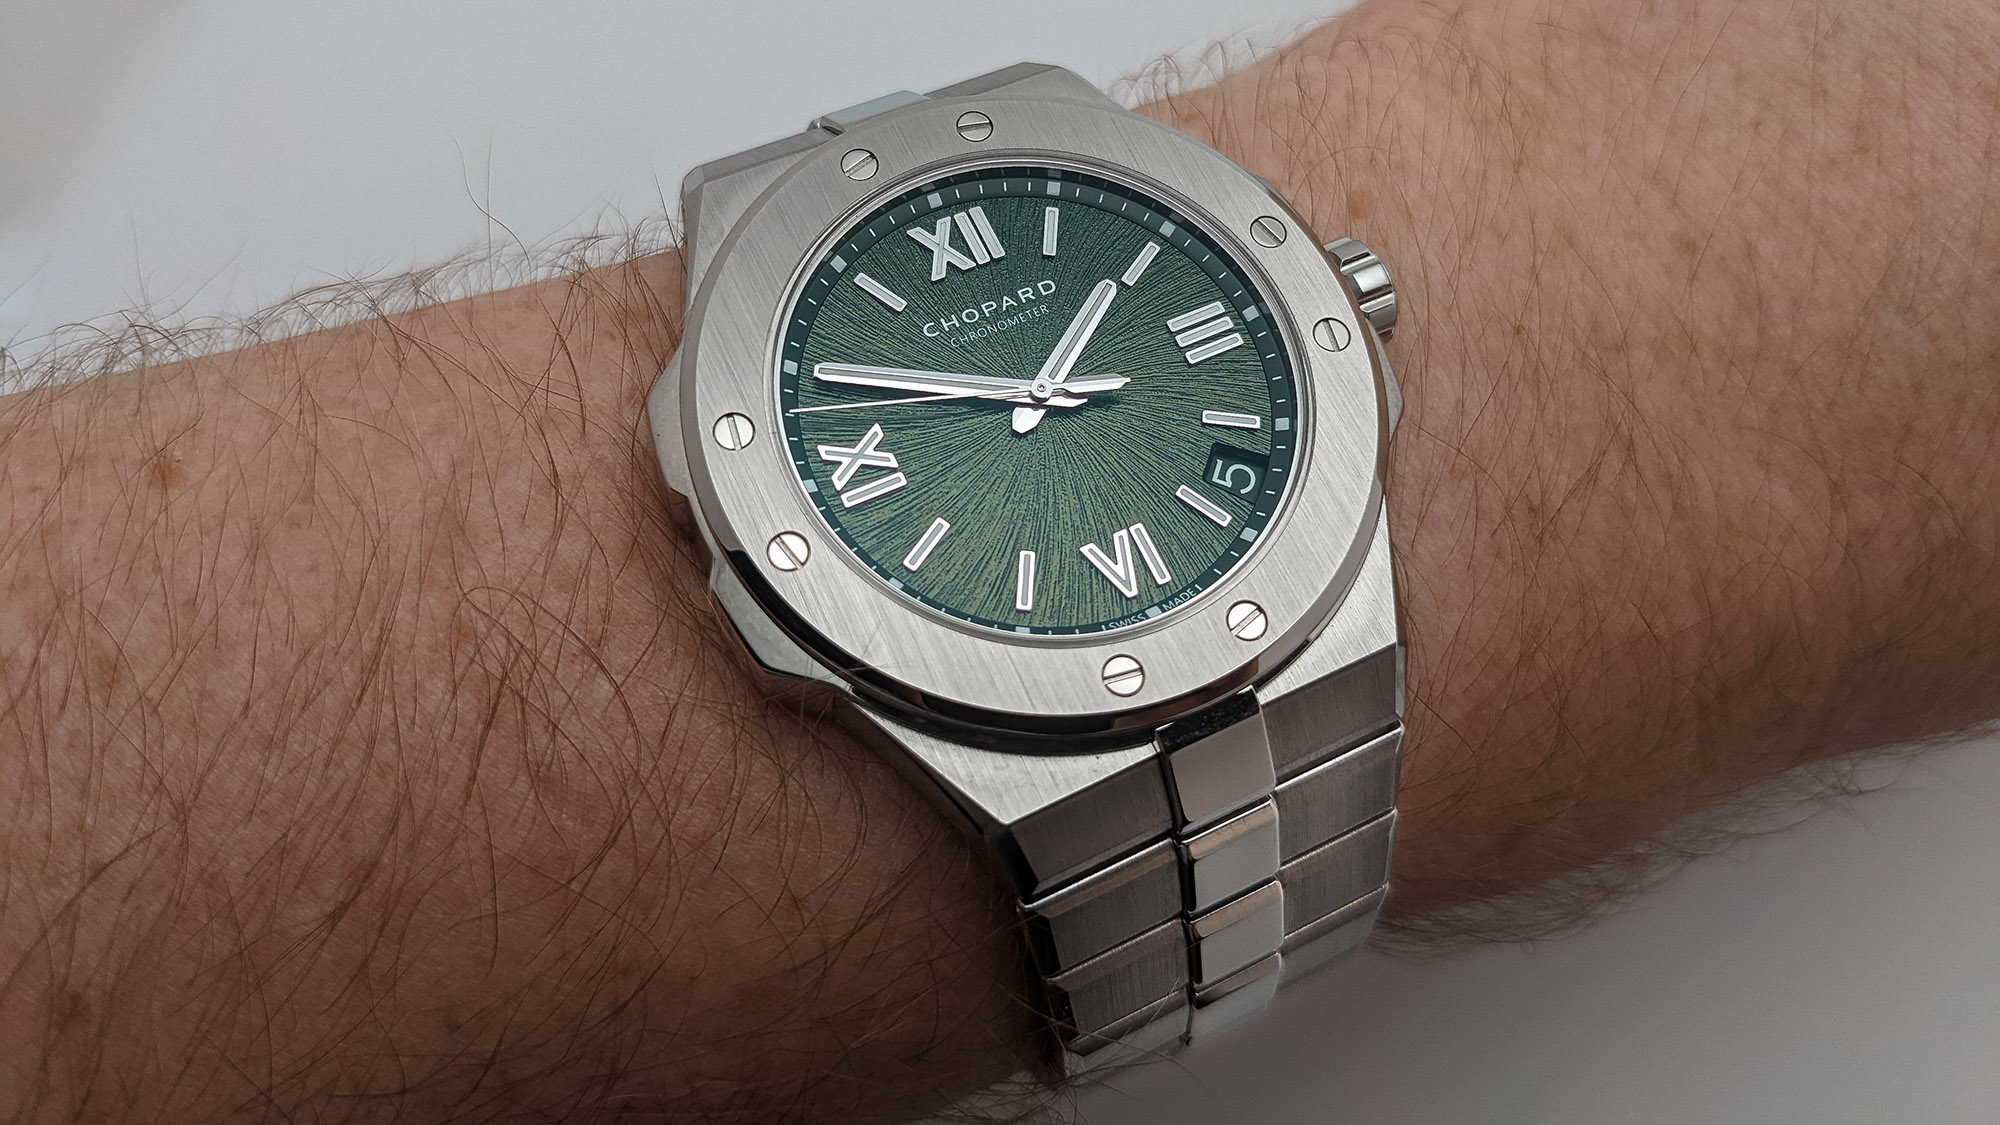 HANDS-ON: The Chopard Alpine Eagle 41mm Pine Green